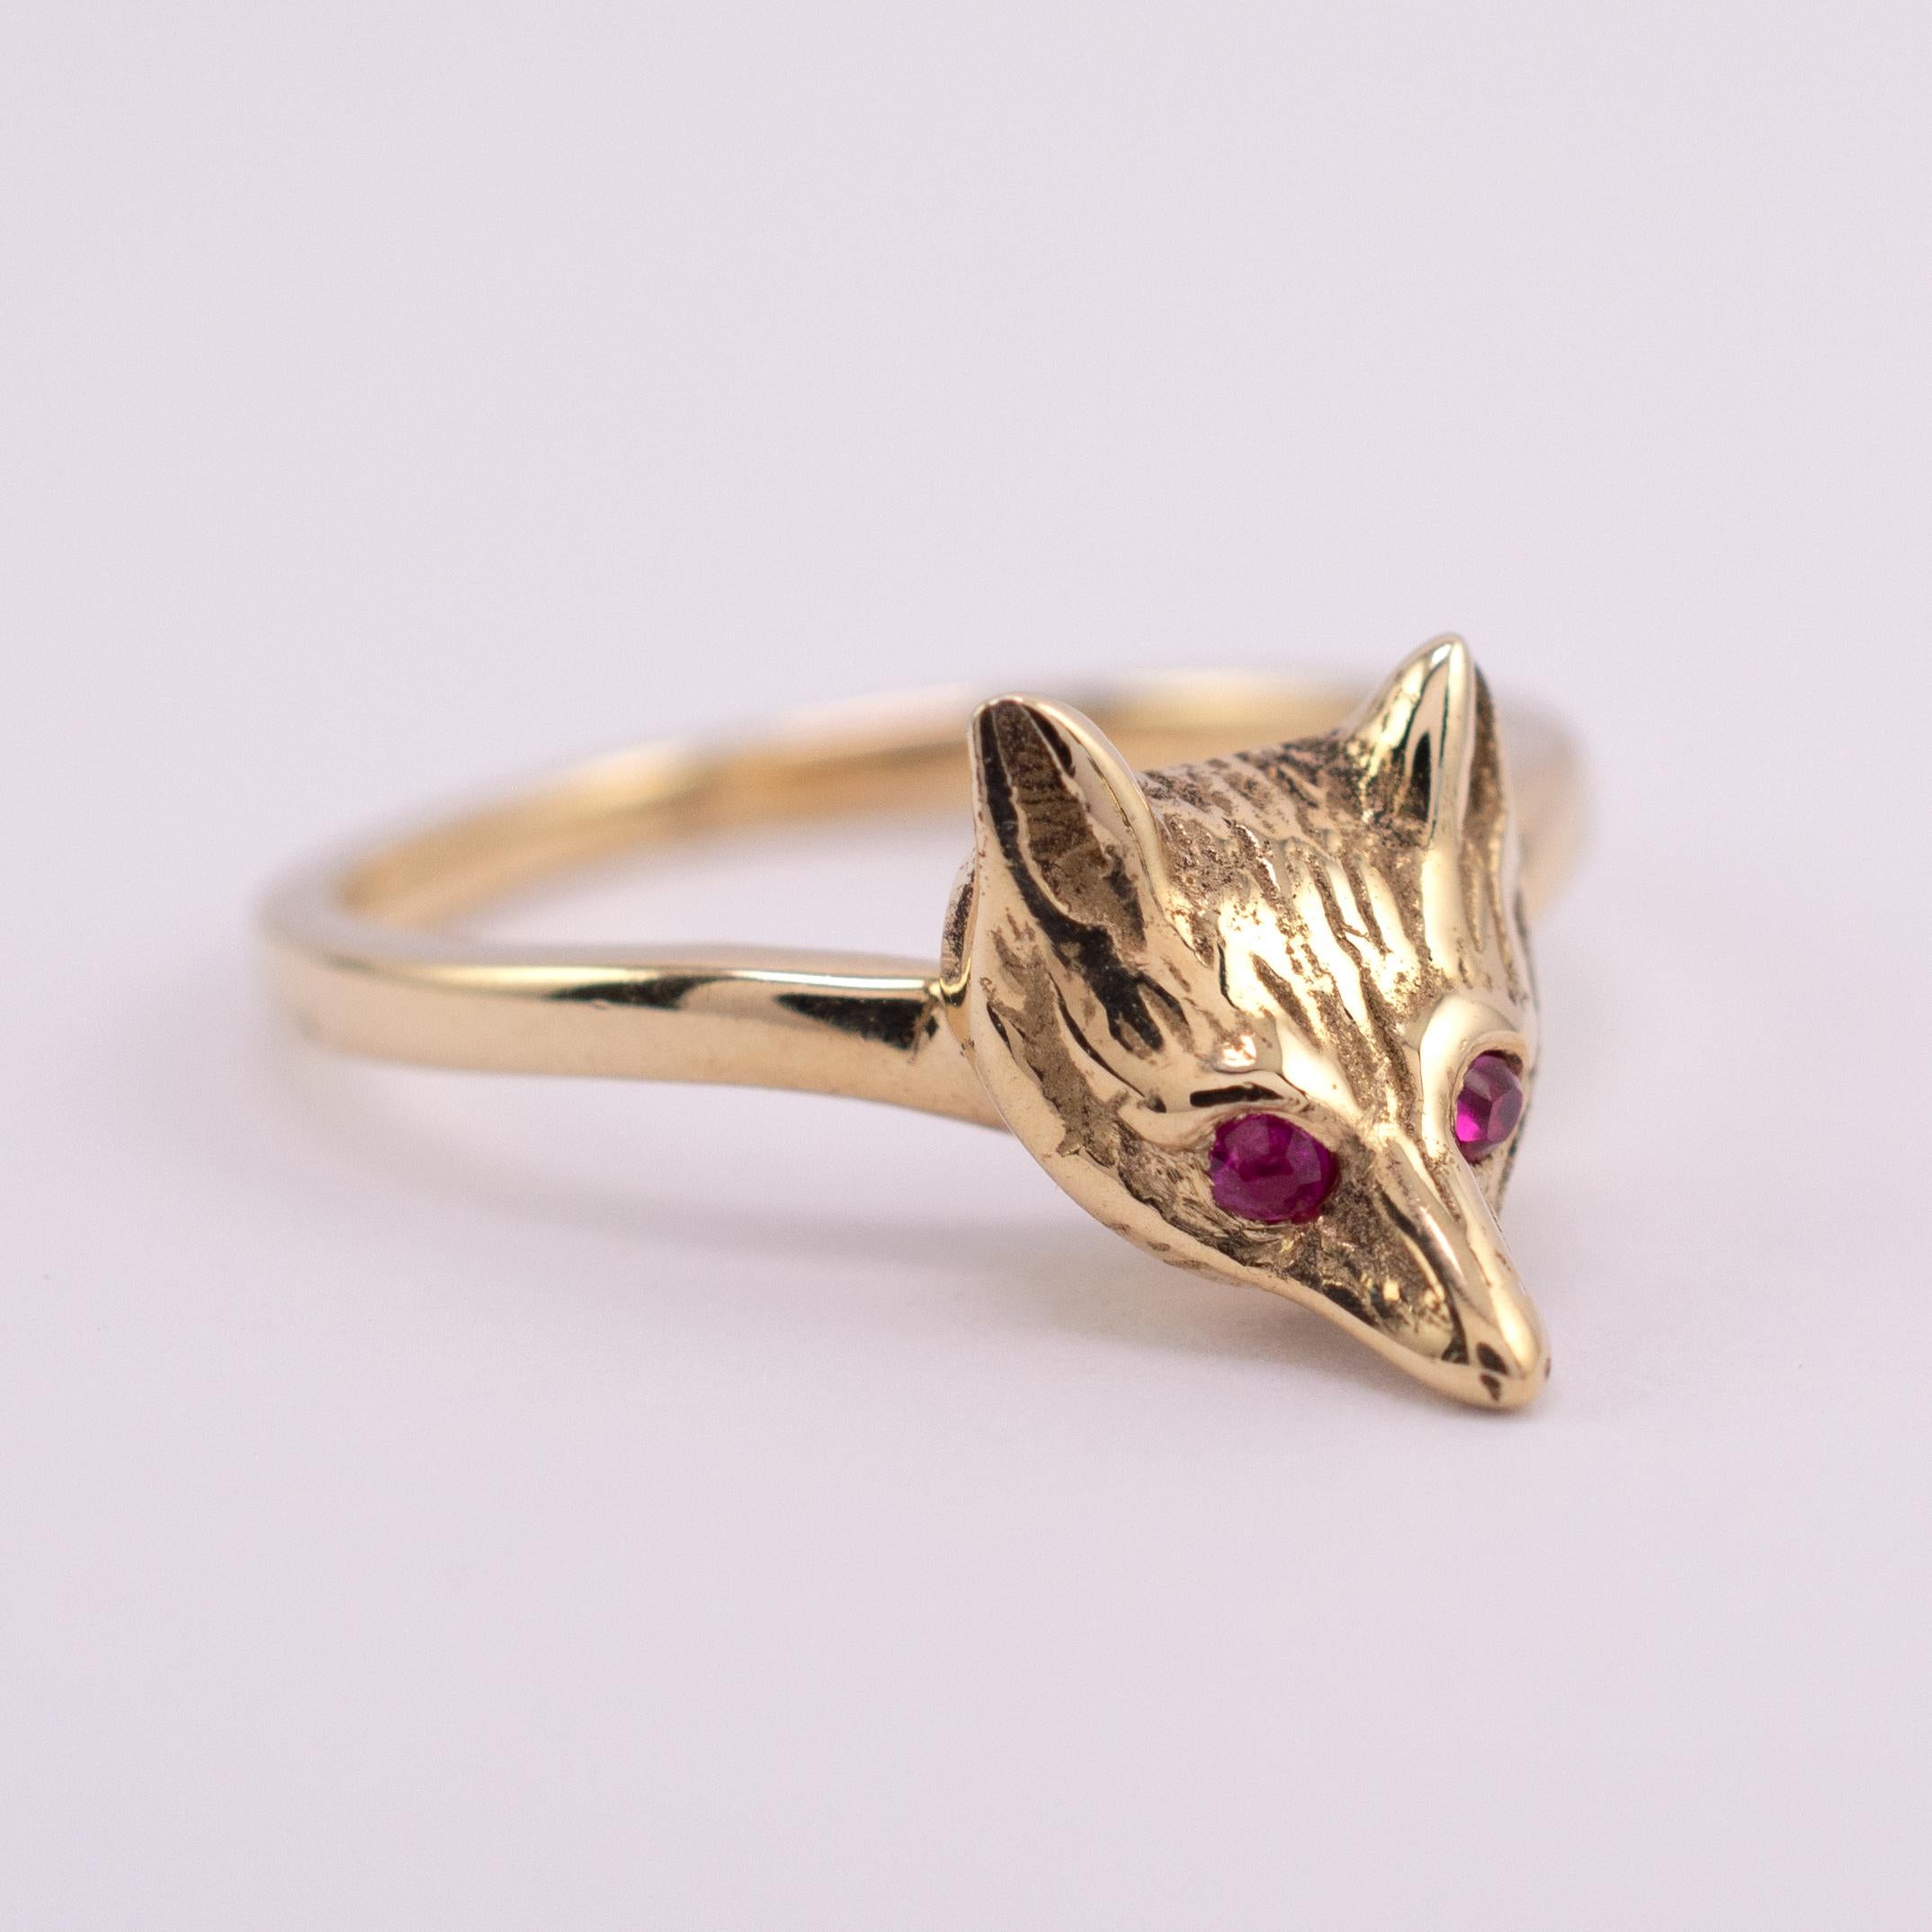 This delightful antique style 9 karat yellow fox head ring is set with rubies

The fox head measures 1 cm and is shown pointing upwards off the finger. The two rubies set into the Fox eyes display a rich translucent pink-red in colour in natural